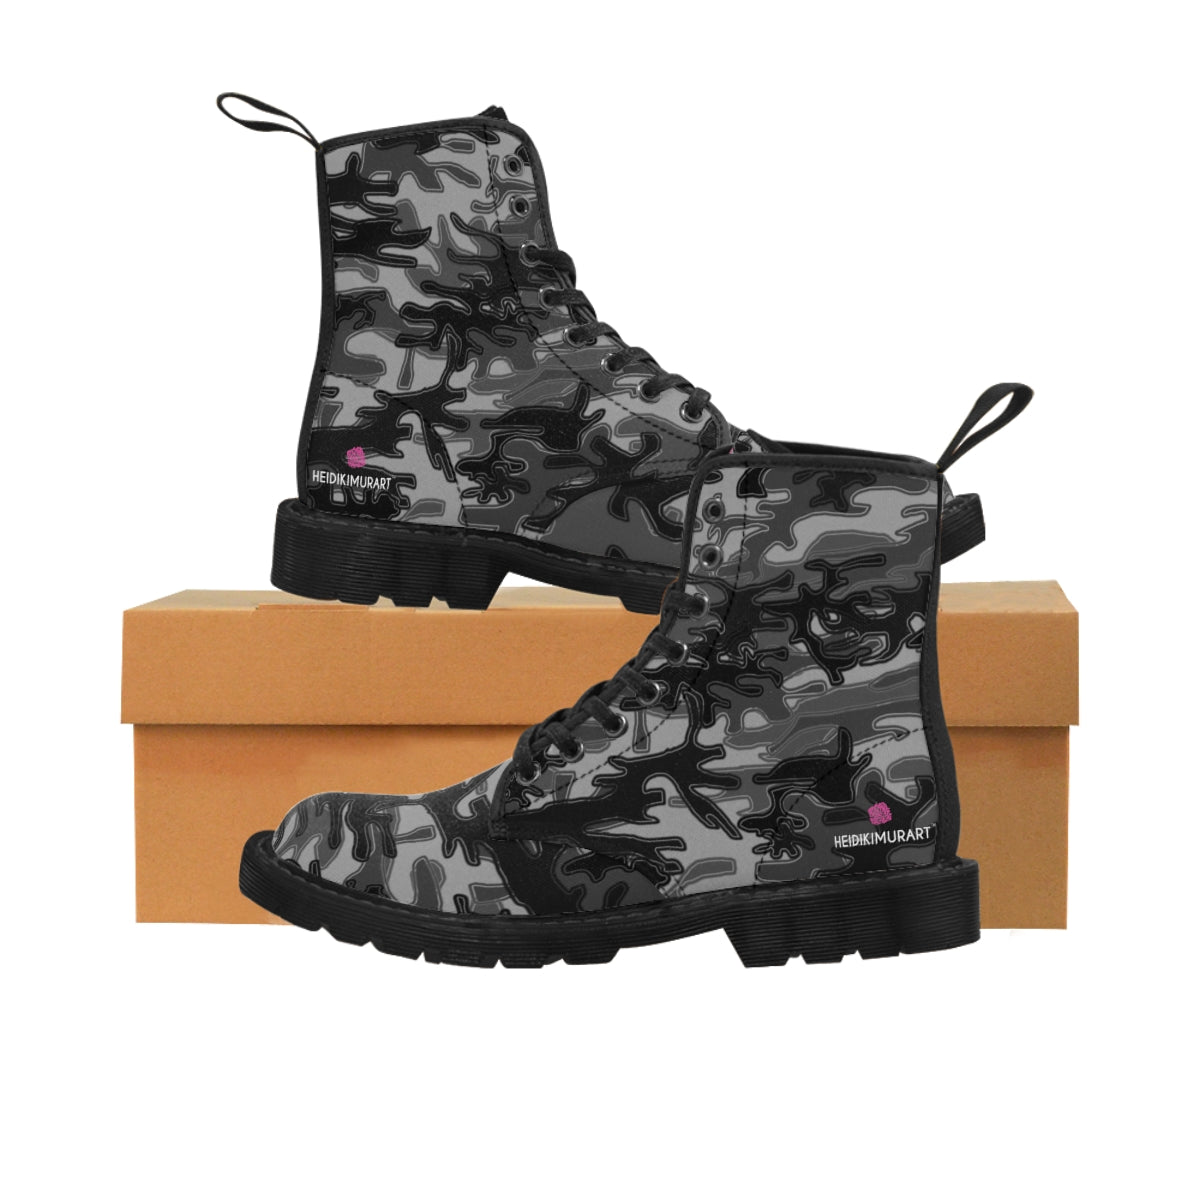 Grey Camouflage Women's Canvas Boots, Army Military Print Casual Fashion Gifts, Camo Shoes For Veteran Wife or Mom or Girlfriends, Combat Boots, Designer Women's Winter Lace-up Toe Cap Hiking Boots Shoes For Women (US Size 6.5-11)